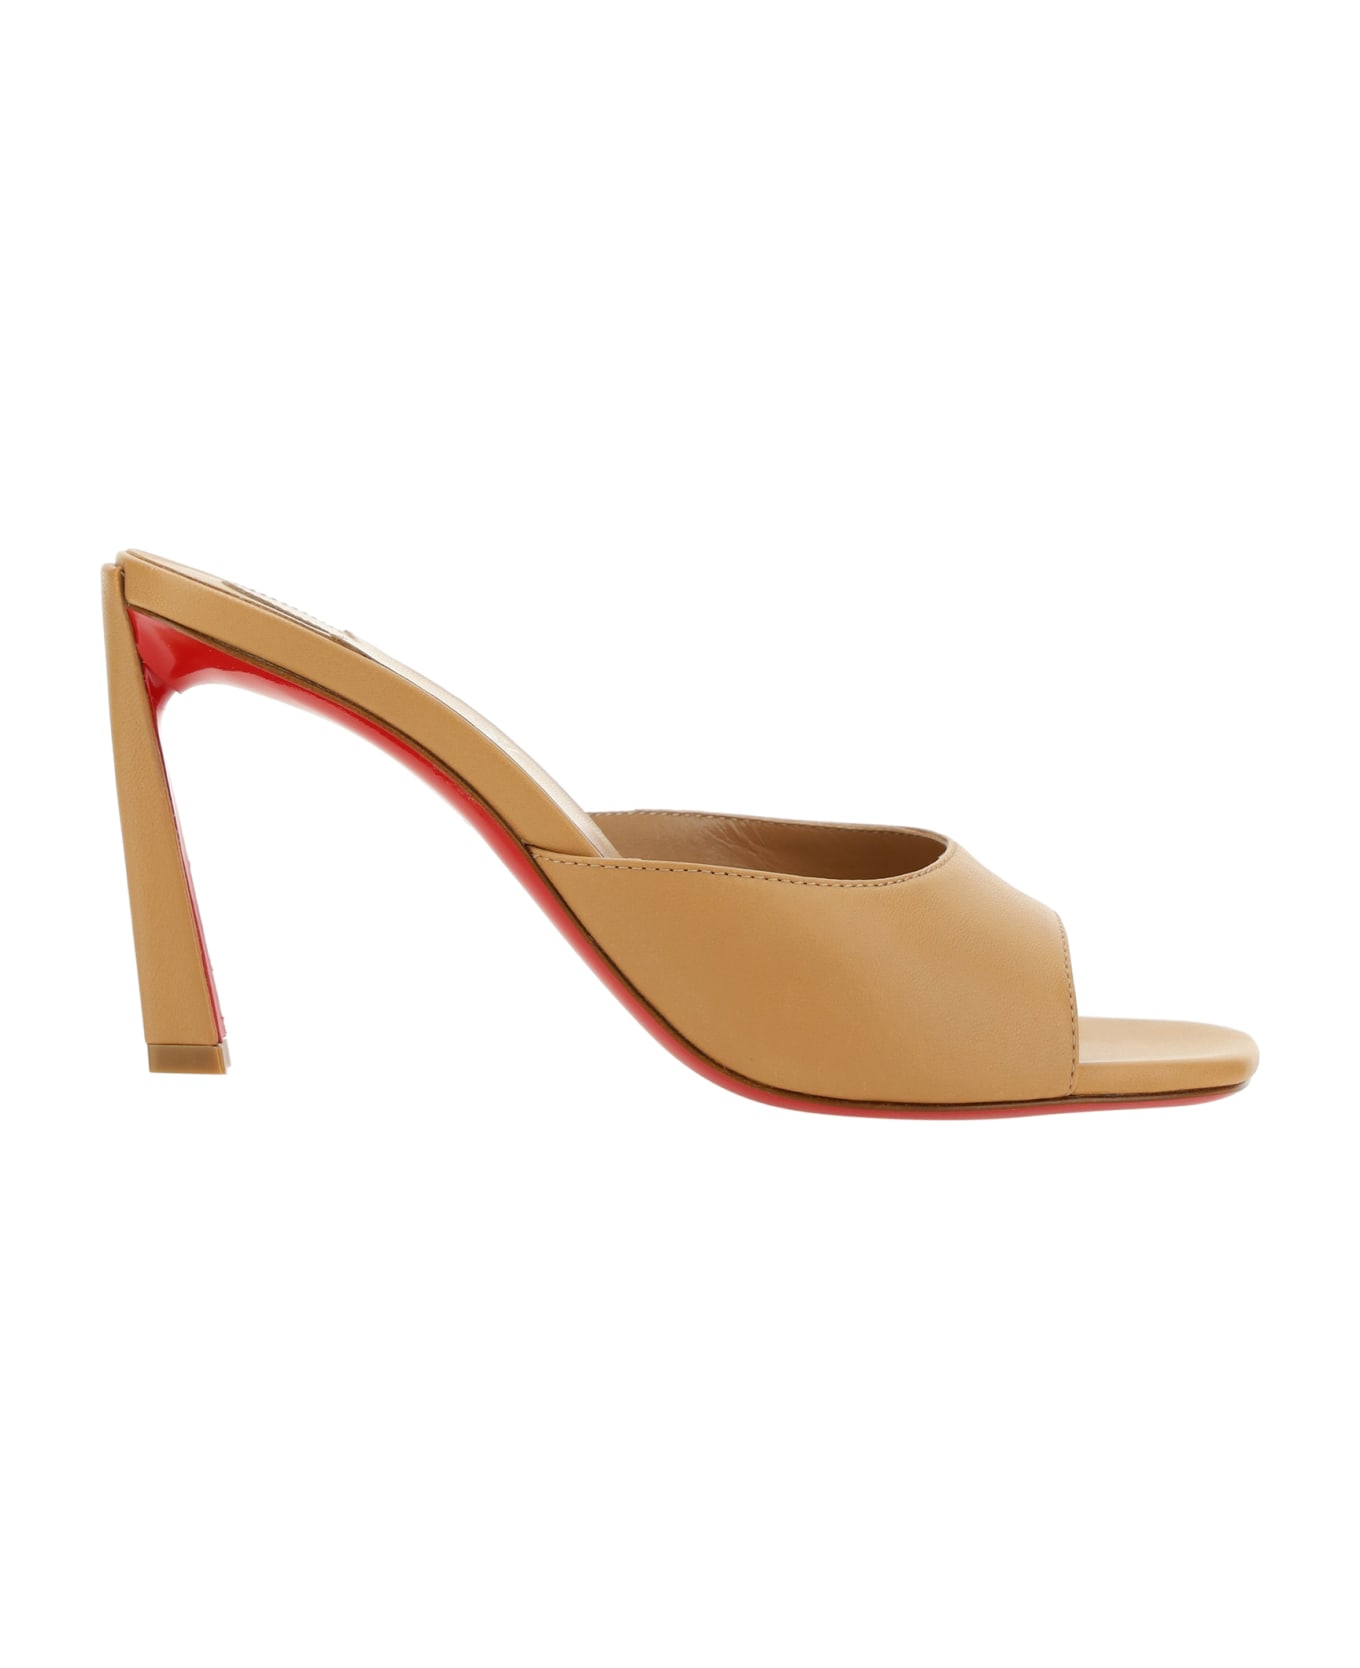 Christian Louboutin Condora Mule Sandals - Toffee/lin Toffee